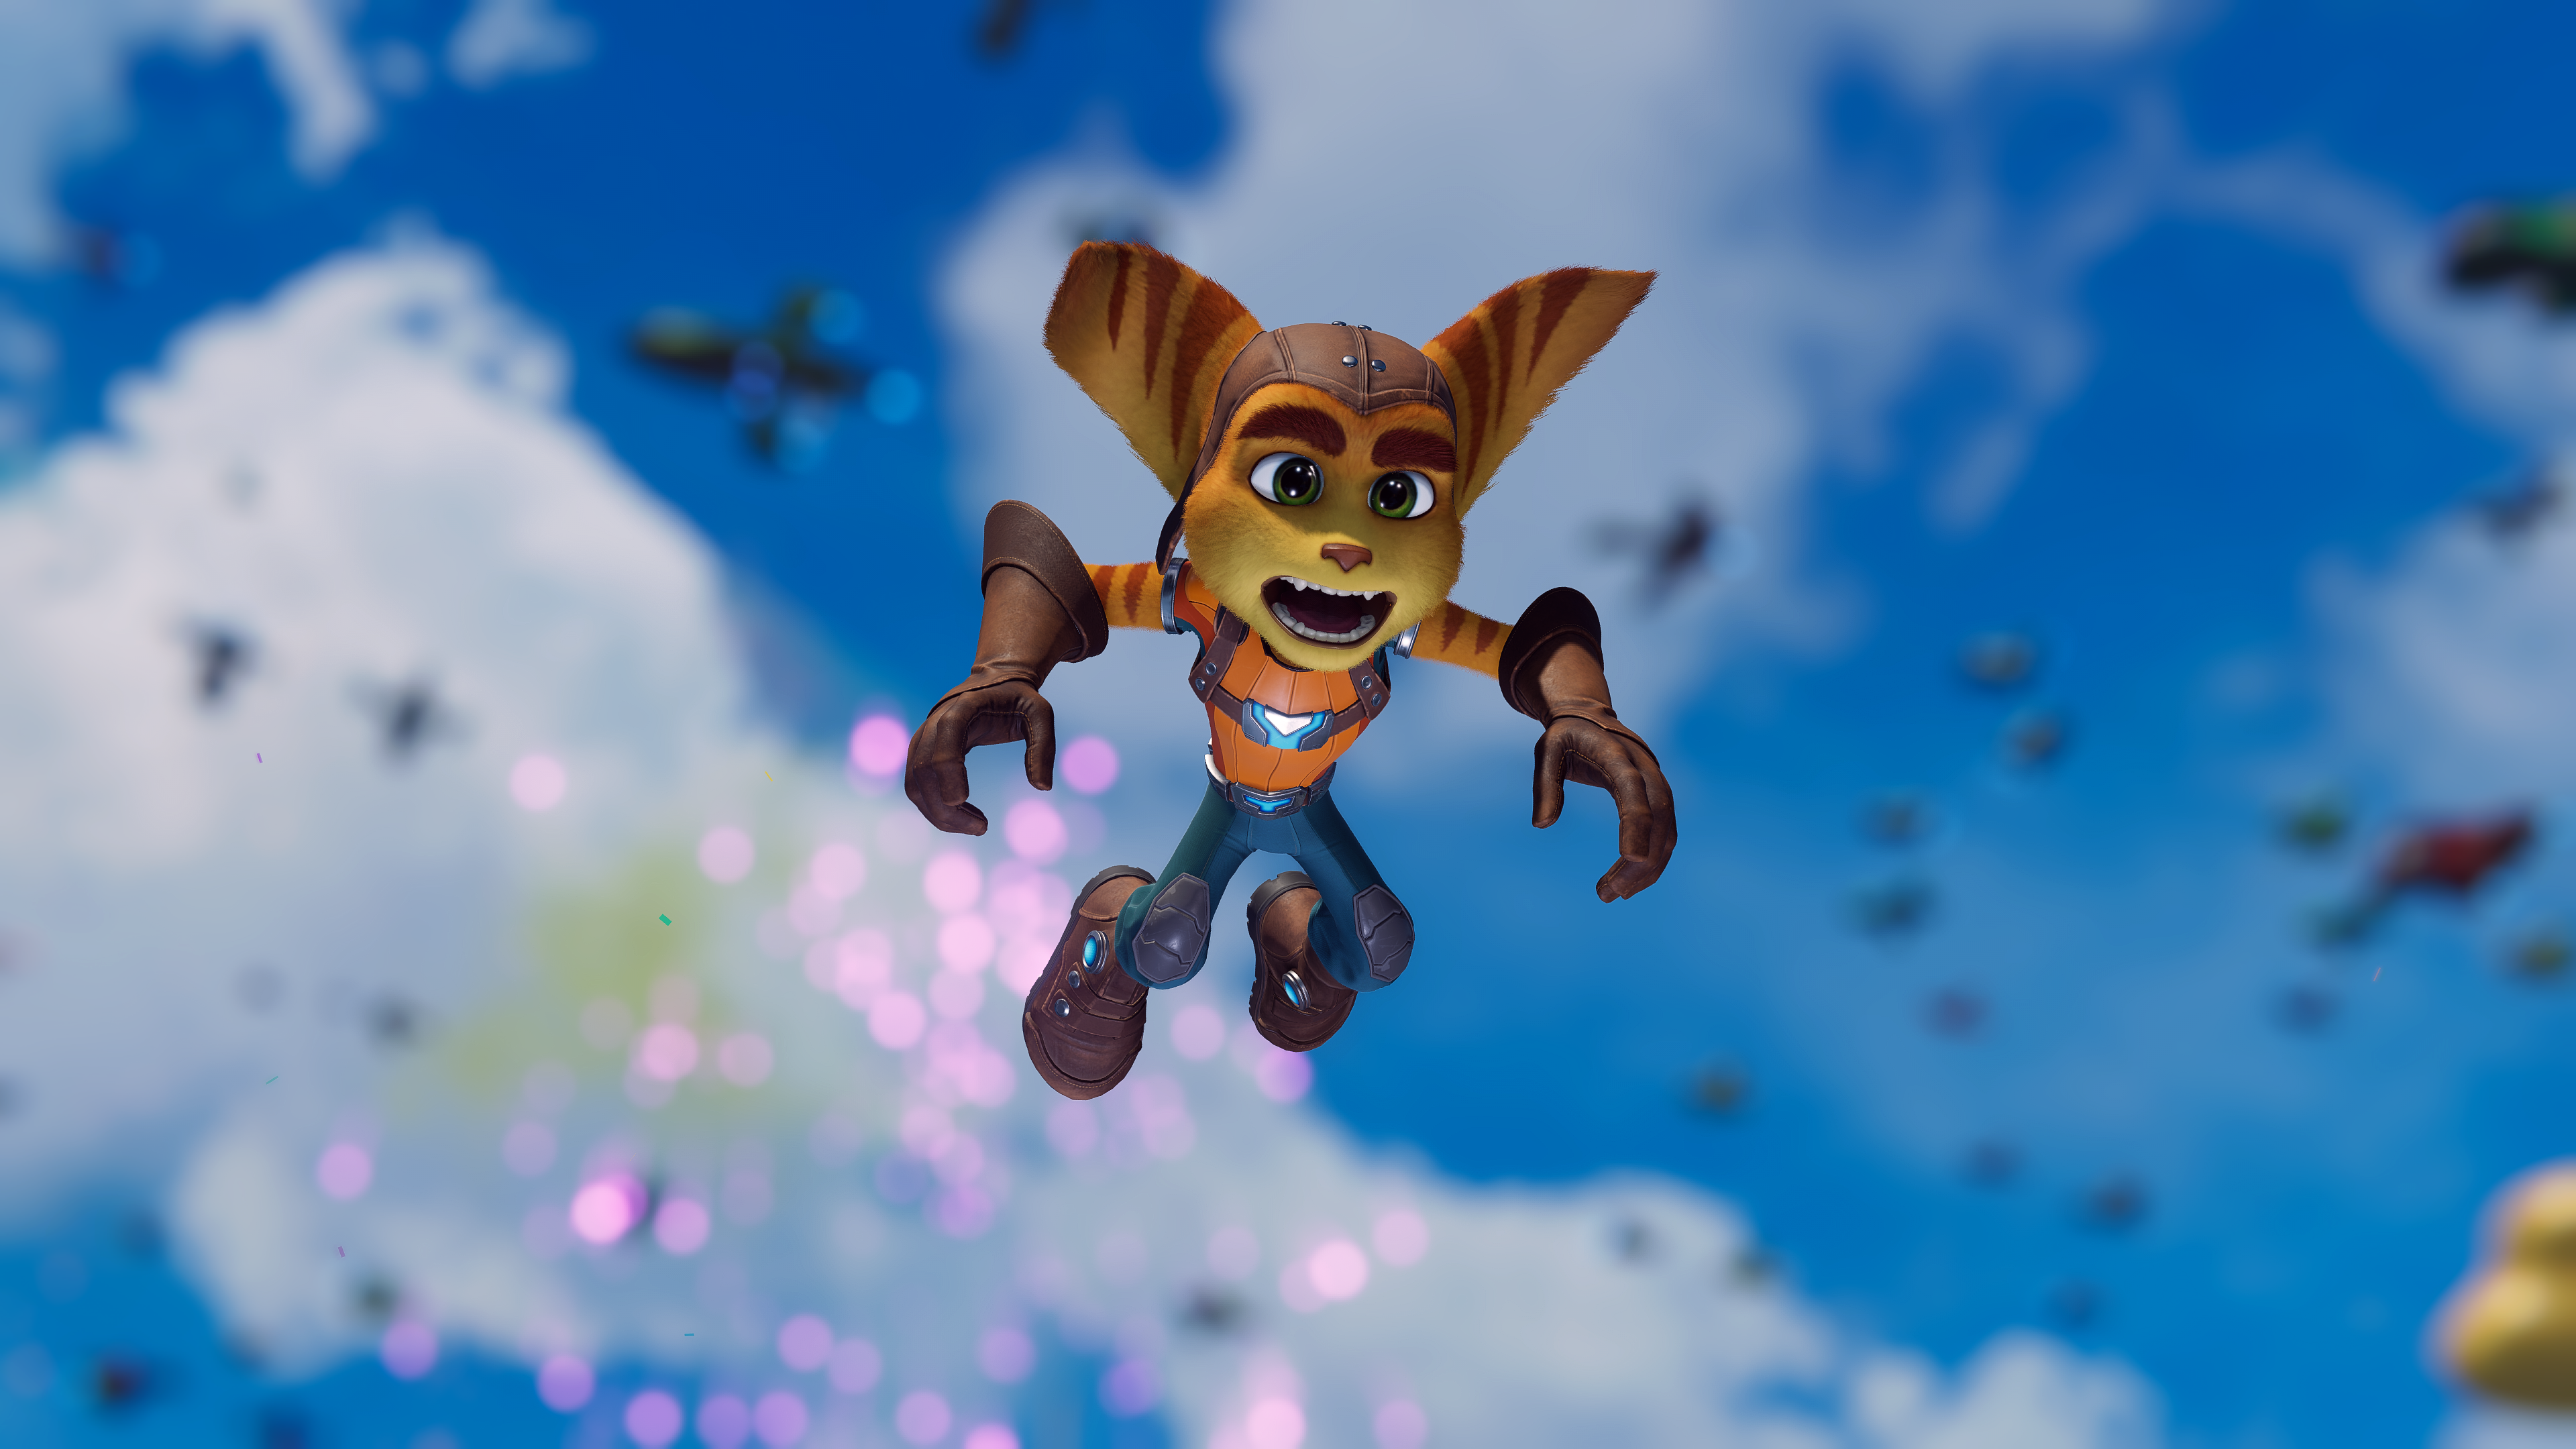 General 3840x2160 Nvidia RTX Ratchet & Clank: Rift Apart Sony video games CGI video game art blurred blurry background video game characters PlayStation Insomniac Games